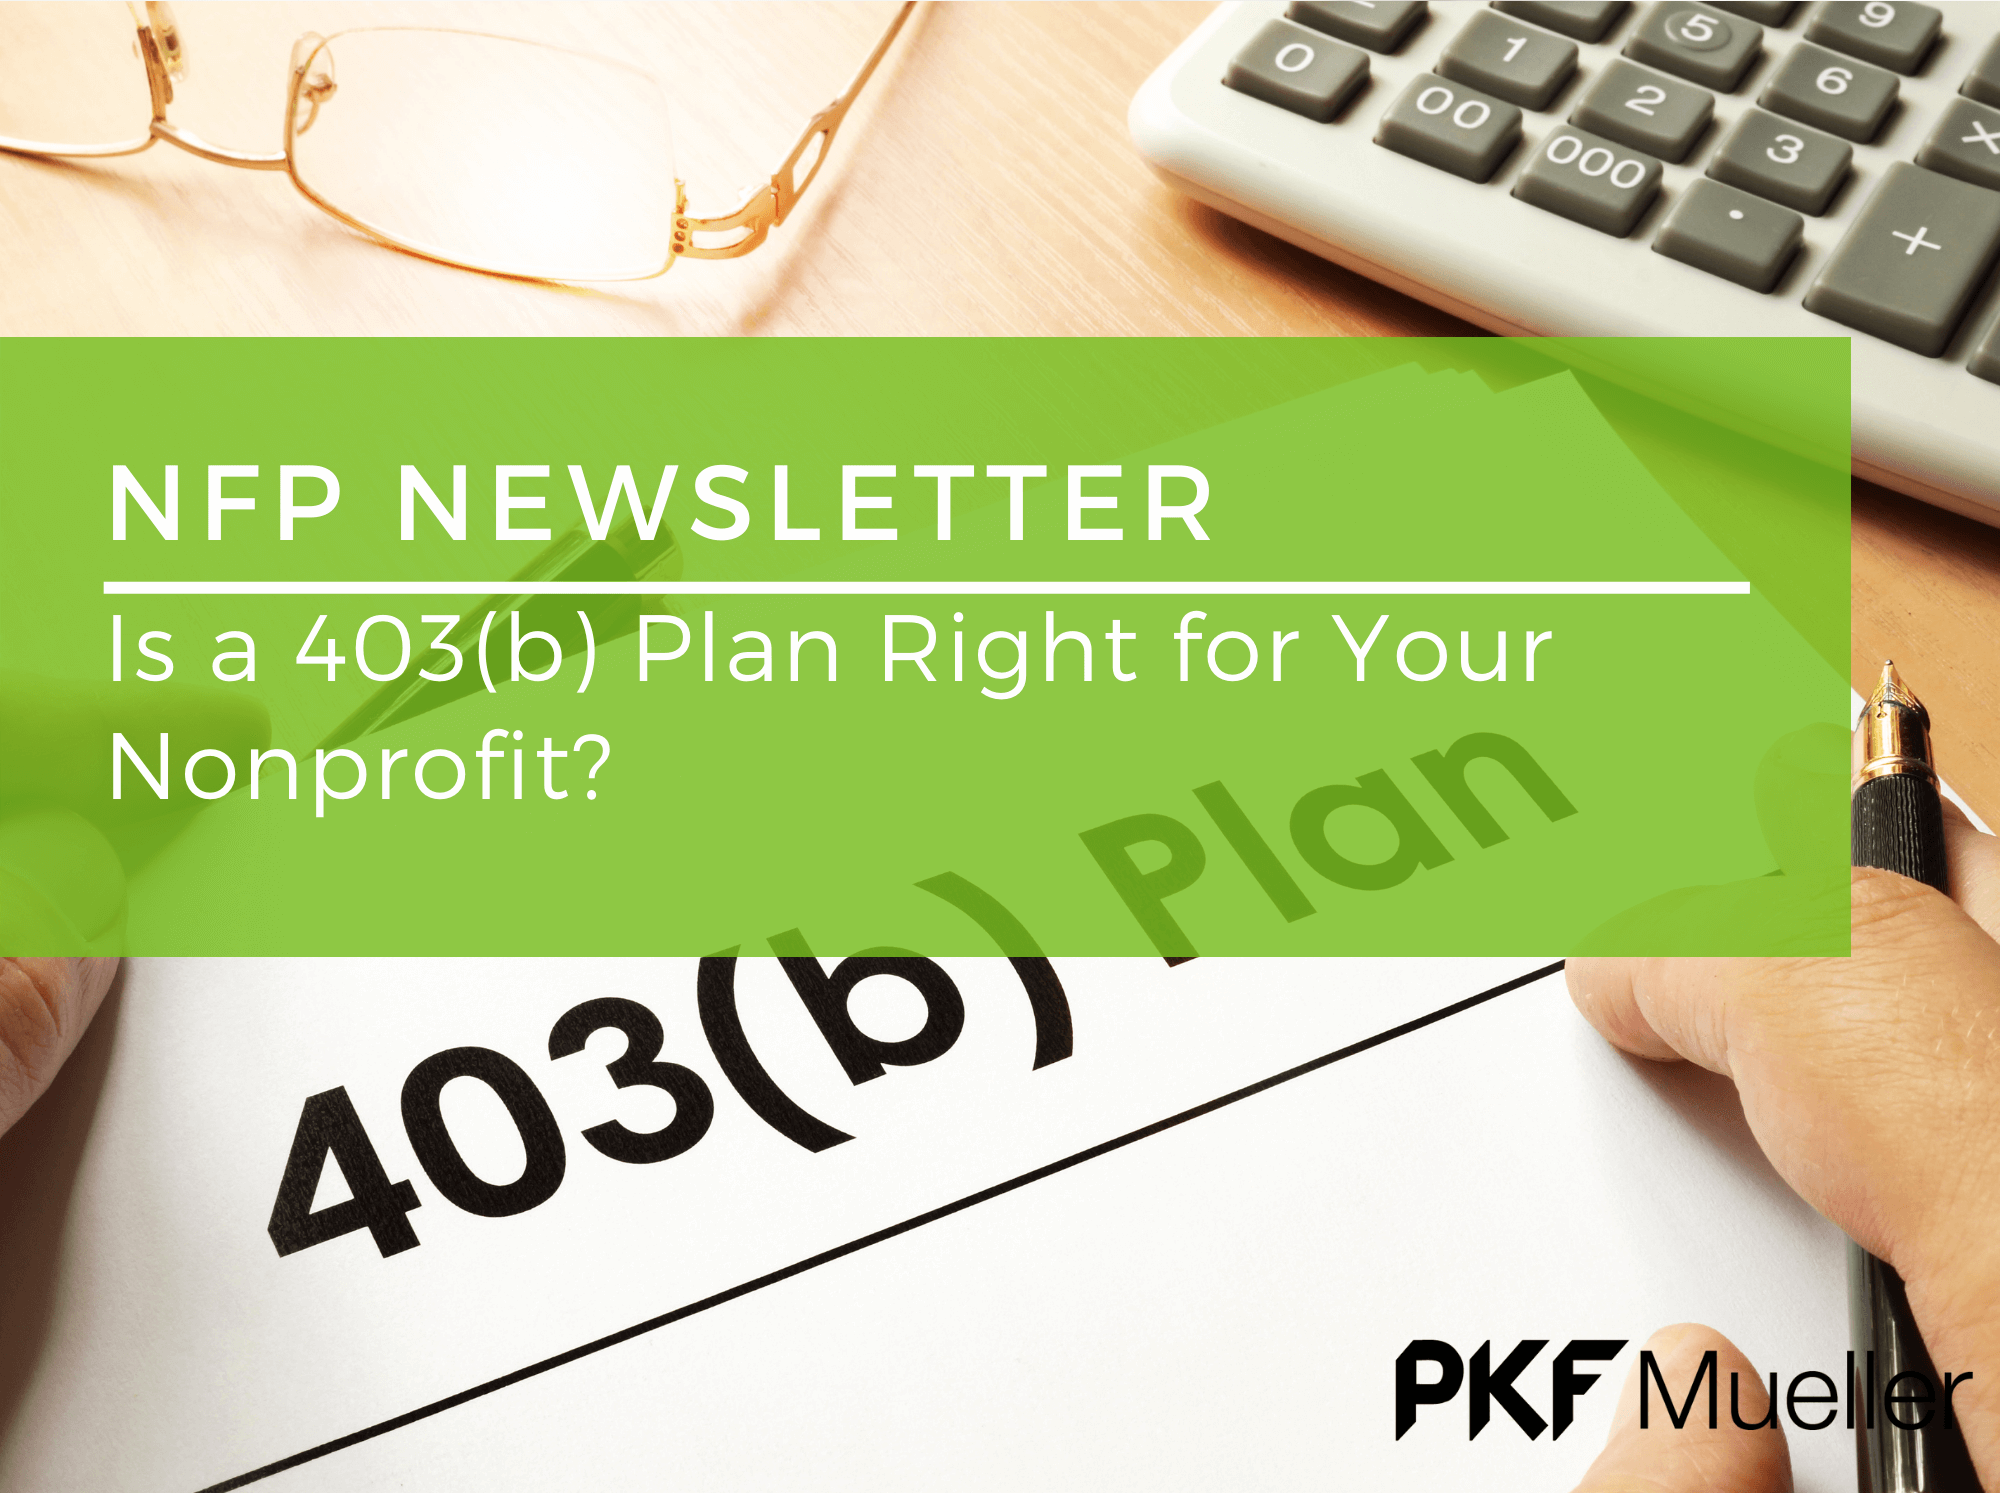 Is a 403(b) plan right for your nonprofit?